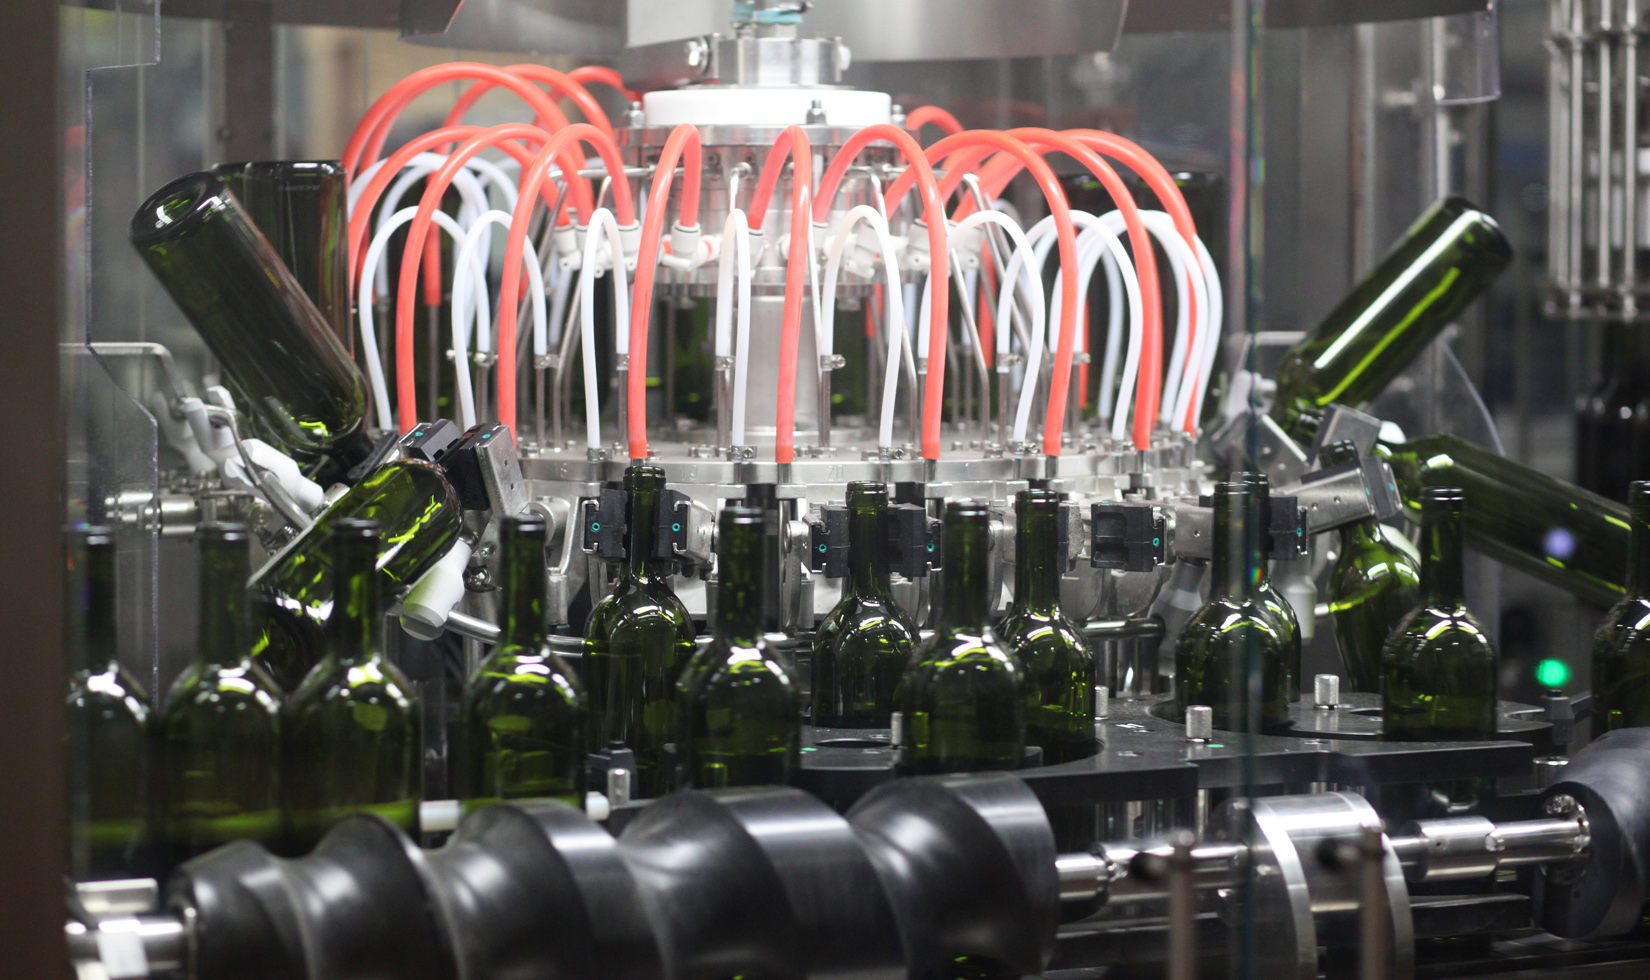 Unlabeled green wine bottles in Jordan Winery's nitrogen sparging machine. It's cylindrical with red and white tubes filling the surrounding bottles.